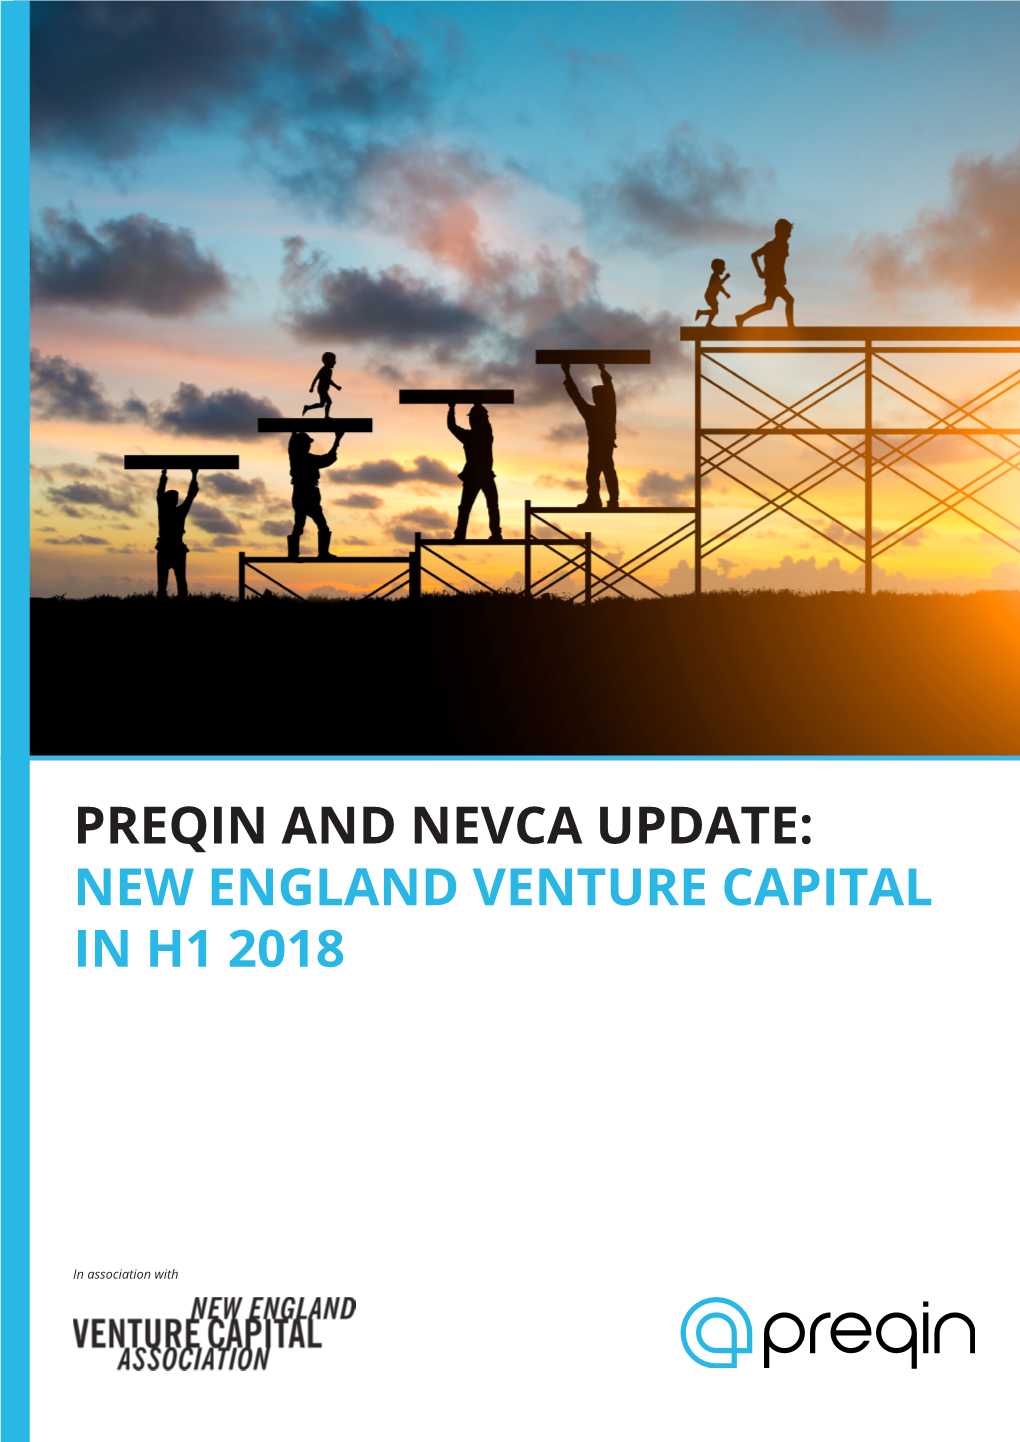 Preqin and Nevca Update: New England Venture Capital in H1 2018